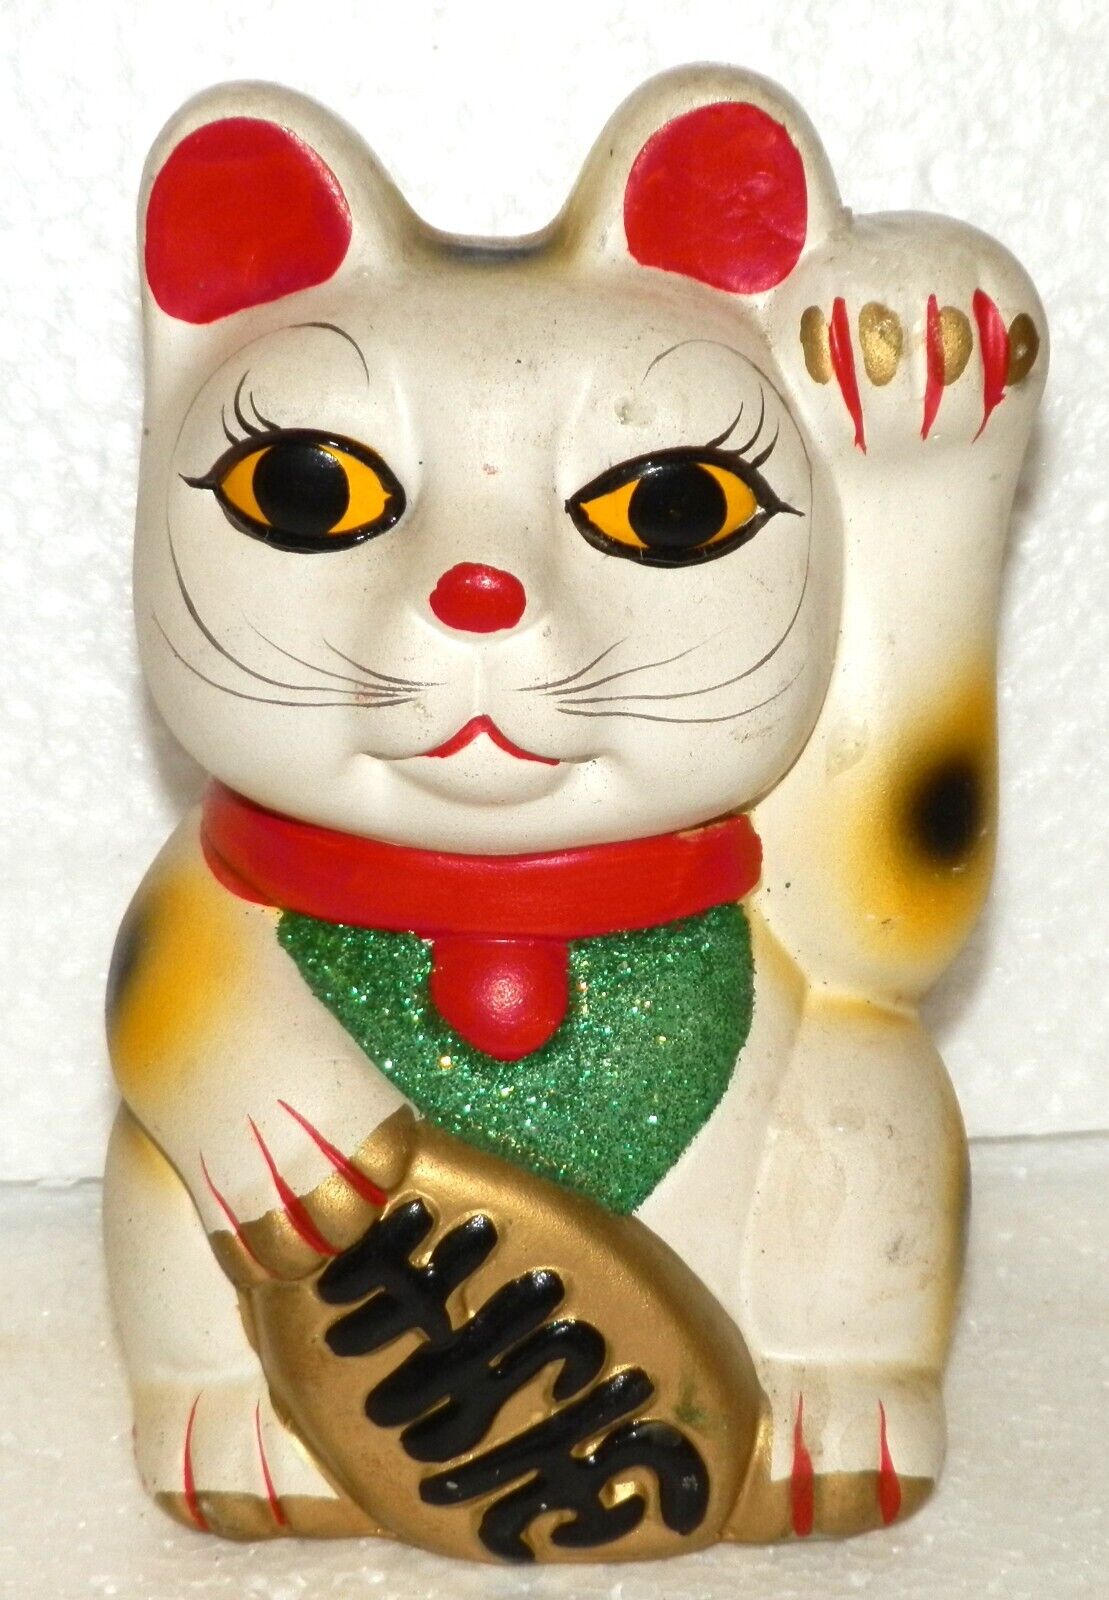 Ceramic Lucky Cat Beckoning Figurine Coin Bank 6.5